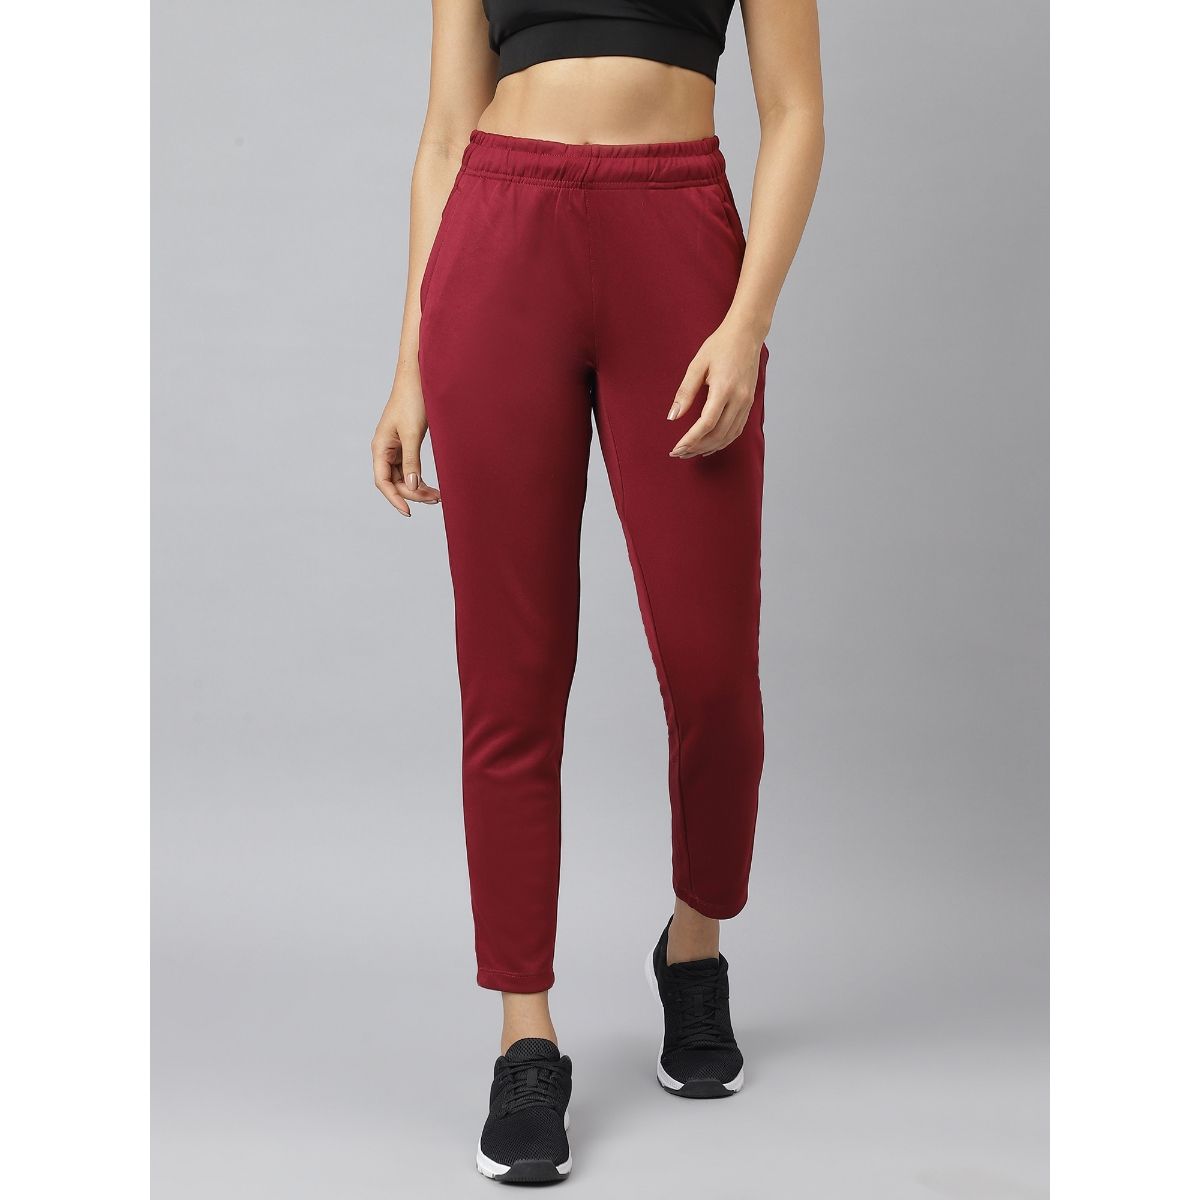 Alcis Women Charcoal Grey Solid Track Pants M Buy Alcis Women Charcoal  Grey Solid Track Pants M Online at Best Price in India  Nykaa